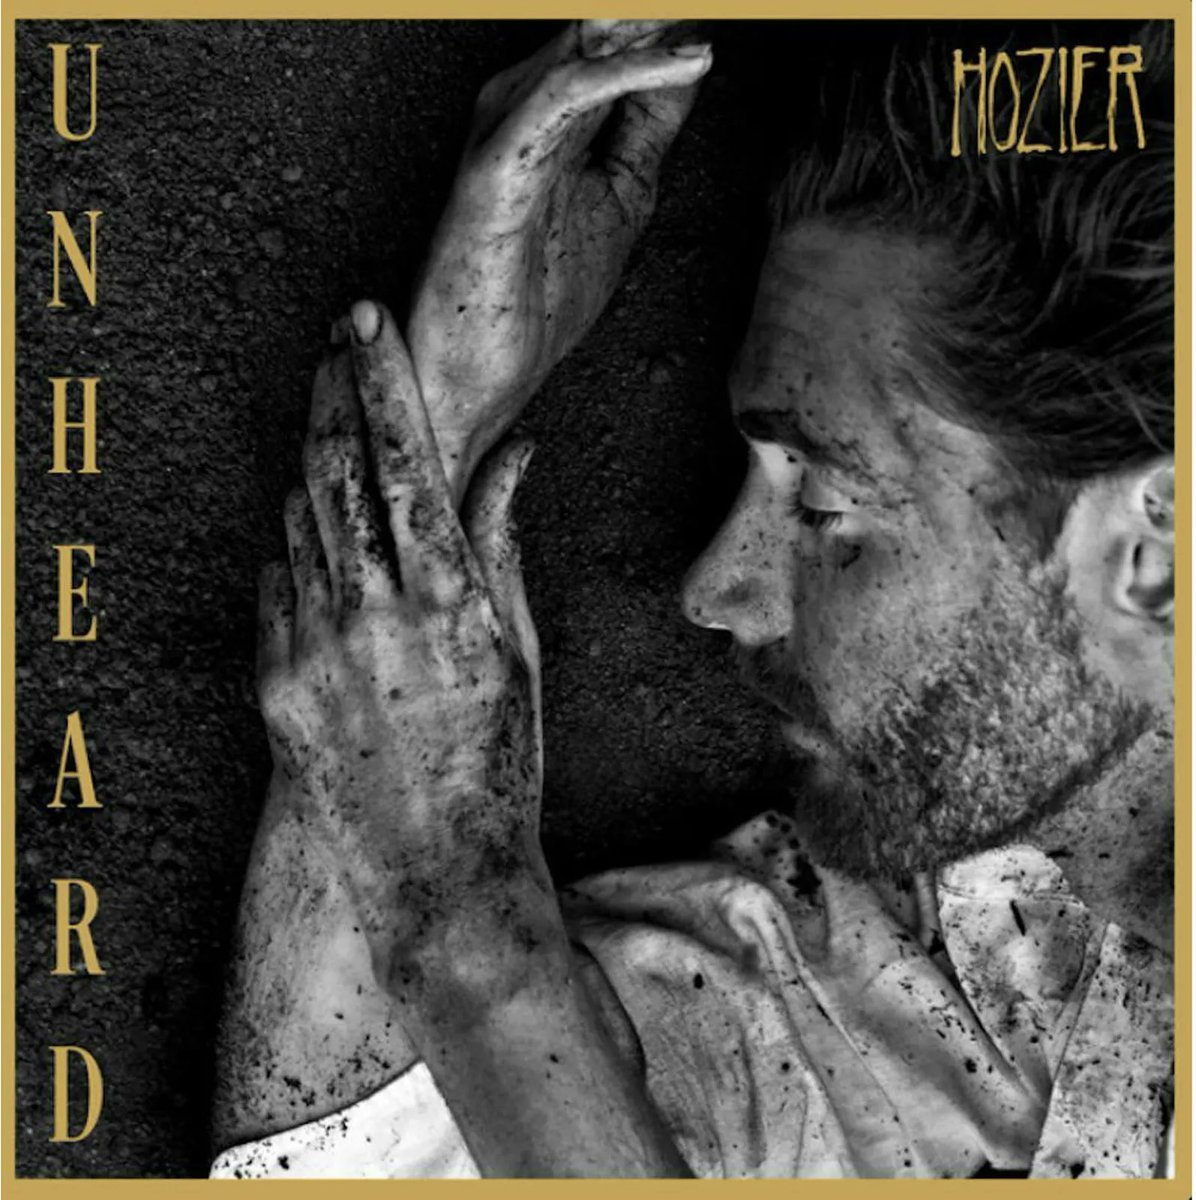 @outsidechild13 I love how music helps you discover new music! Love @Hozier and in turn discovered @outsidechild13 N/P ‘The Returner’ on repeat! Joyous, raucous and a work of art! #wildflowerandbarley #Hozier